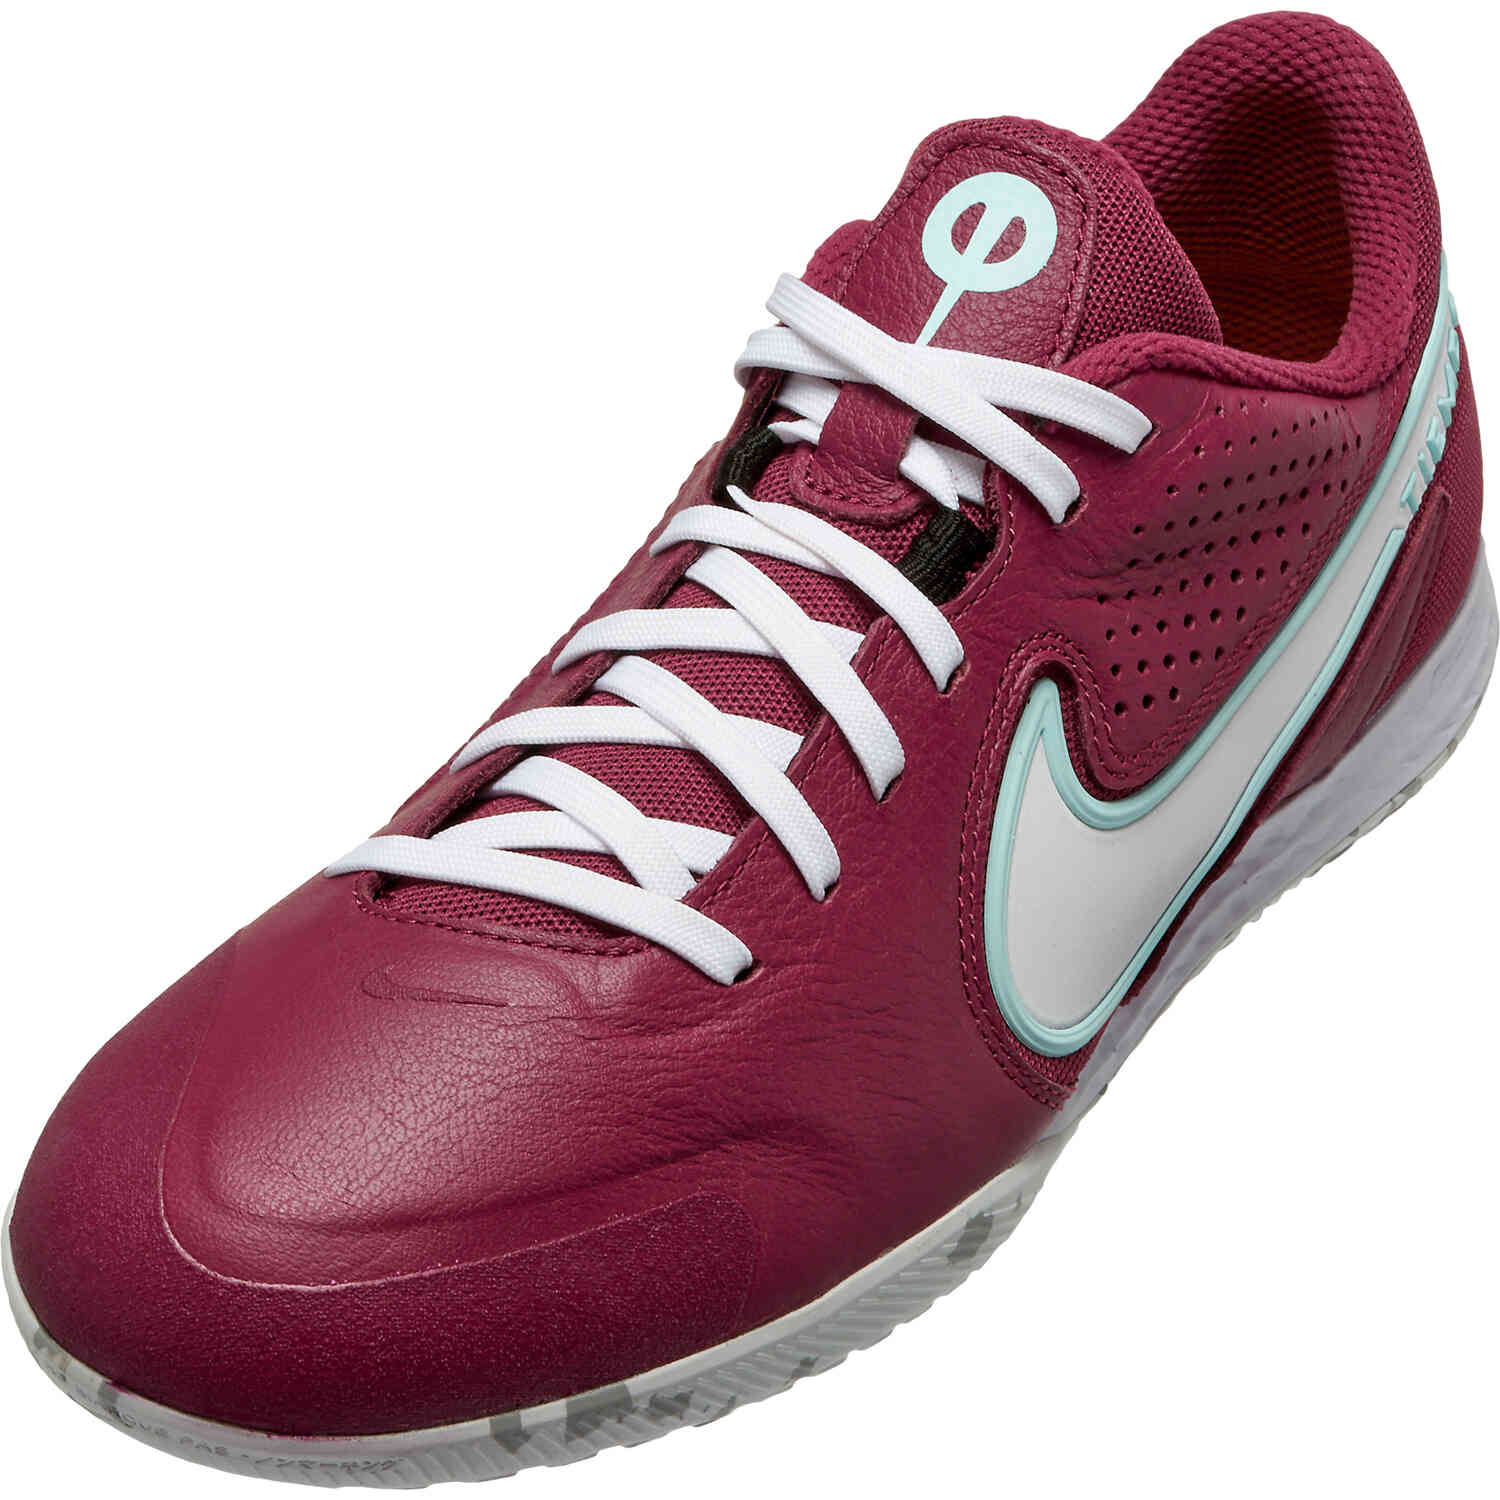 Nike Tiempo Legend 9 Pro IC Rosewood & with Glacier with Pink Foam - SoccerPro